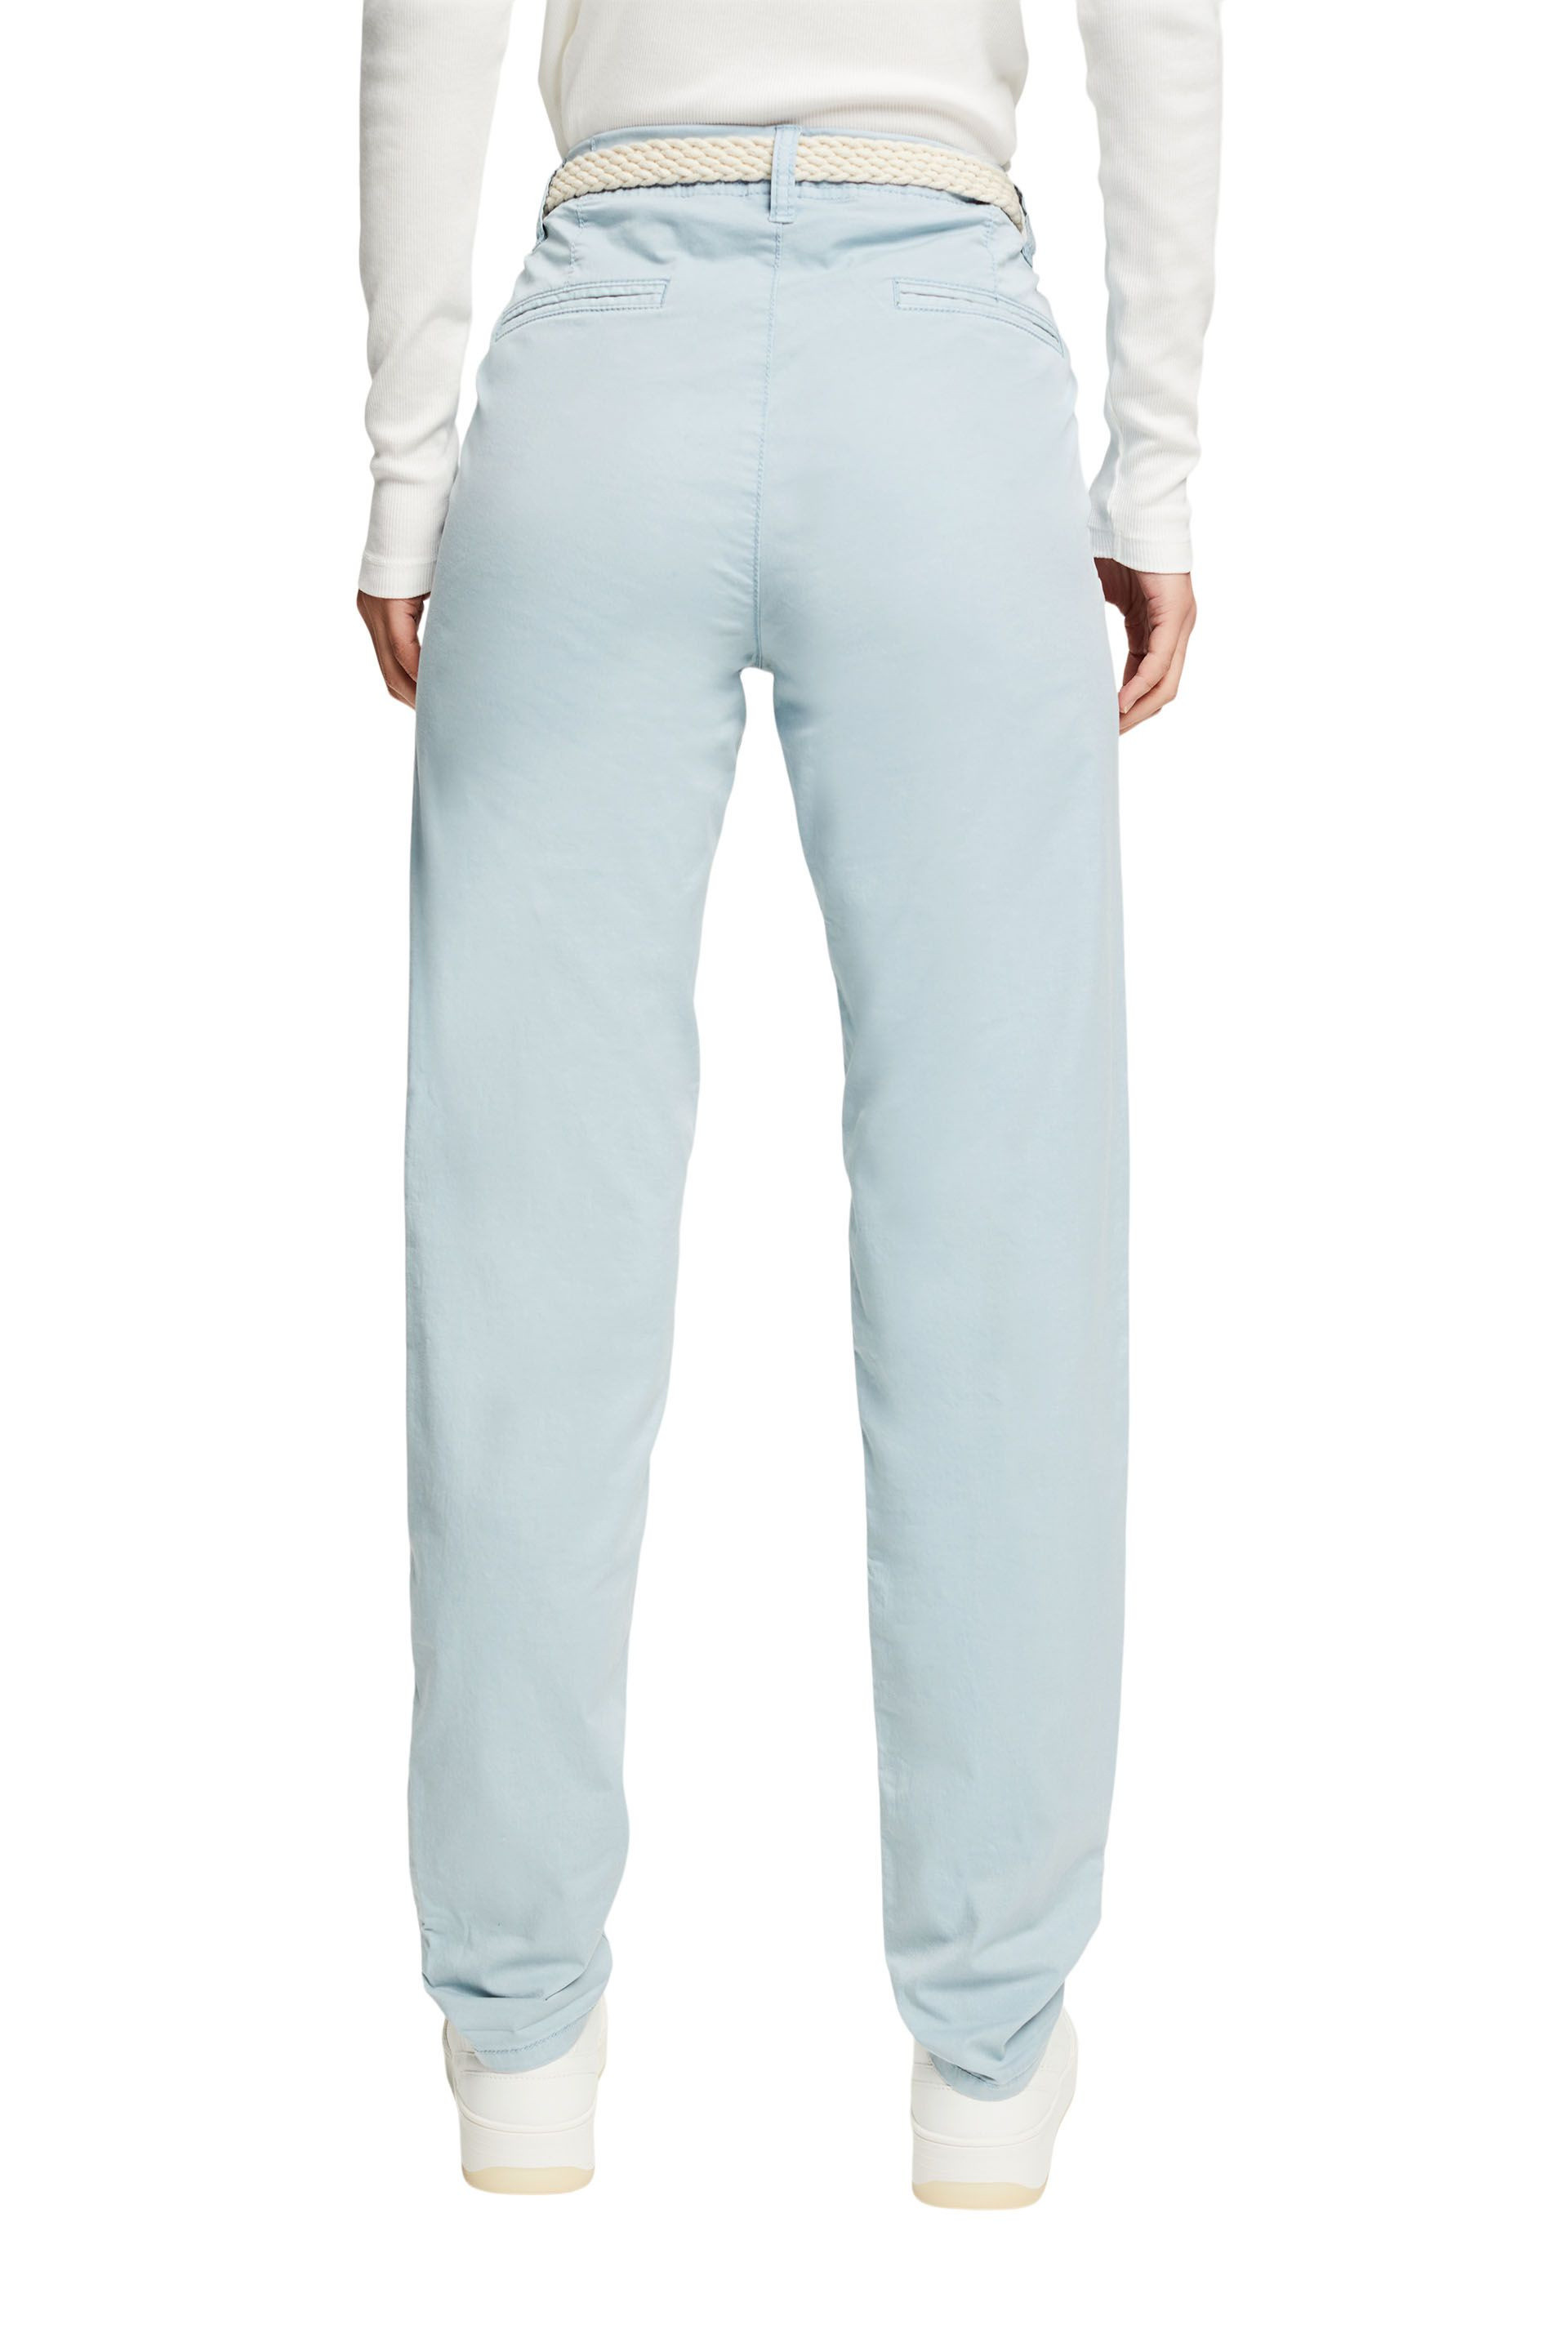 Chino trousers with woven belt, Blue Celeste, large image number 2